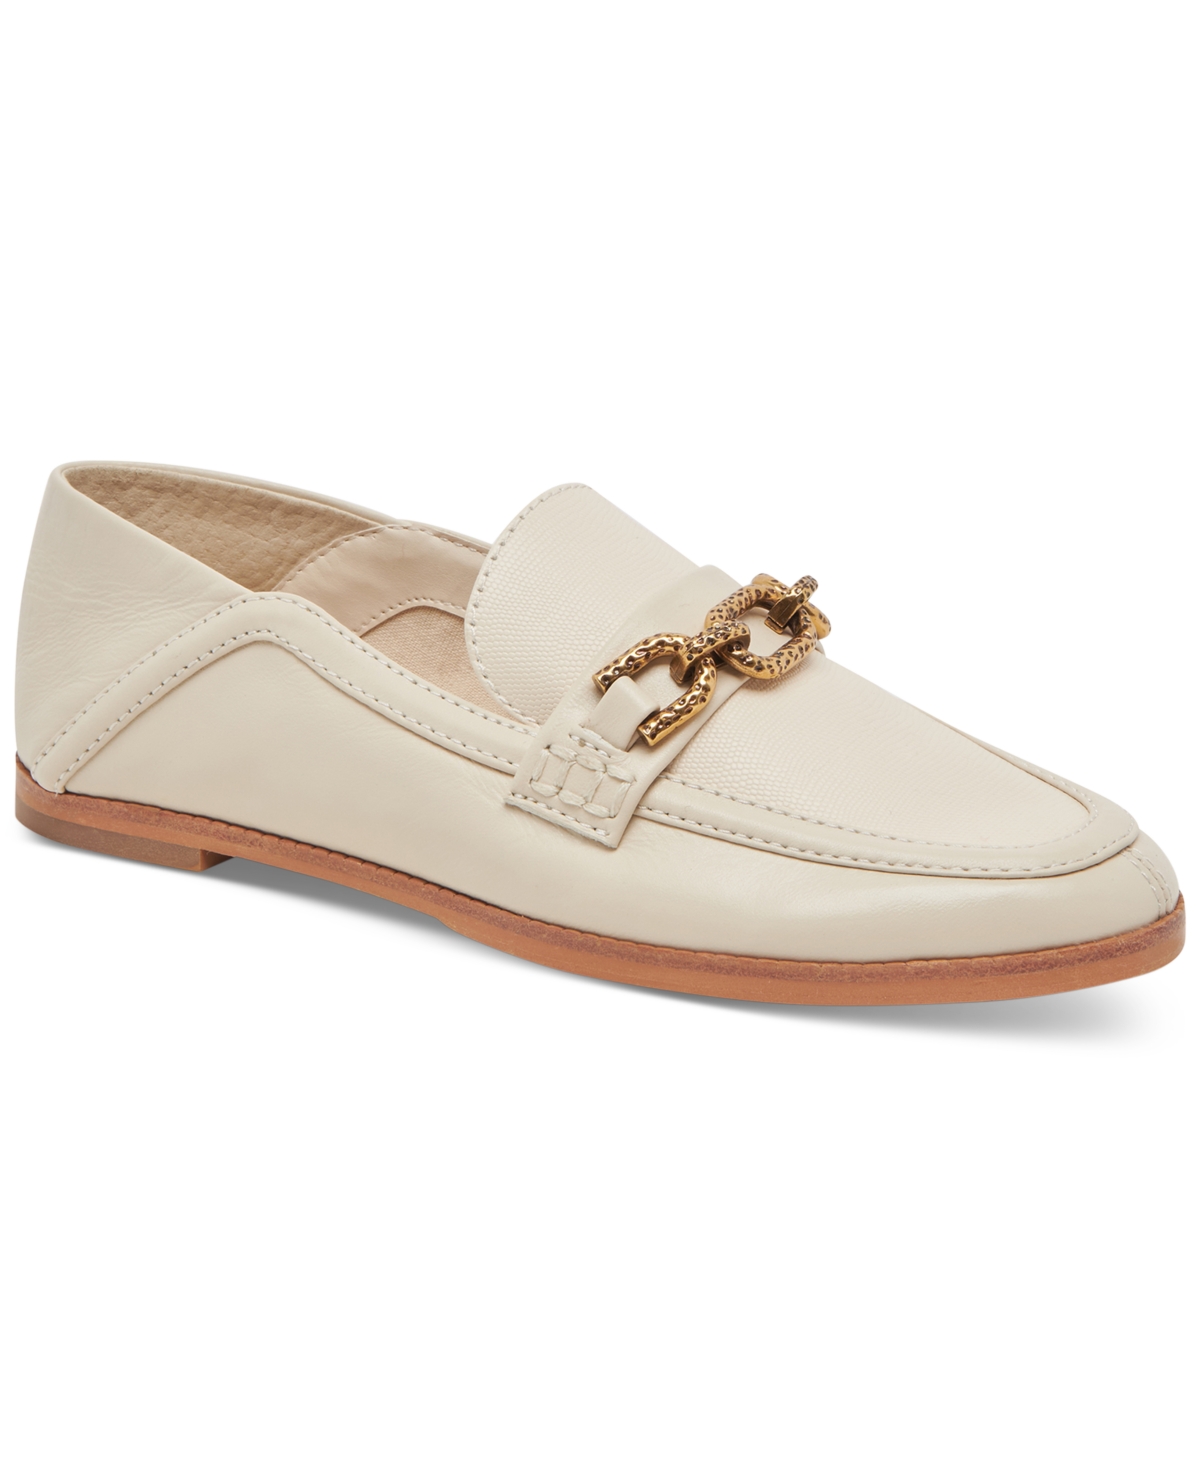 DOLCE VITA WOMEN'S REIGN TAILORED CHAIN LOAFERS WOMEN'S SHOES